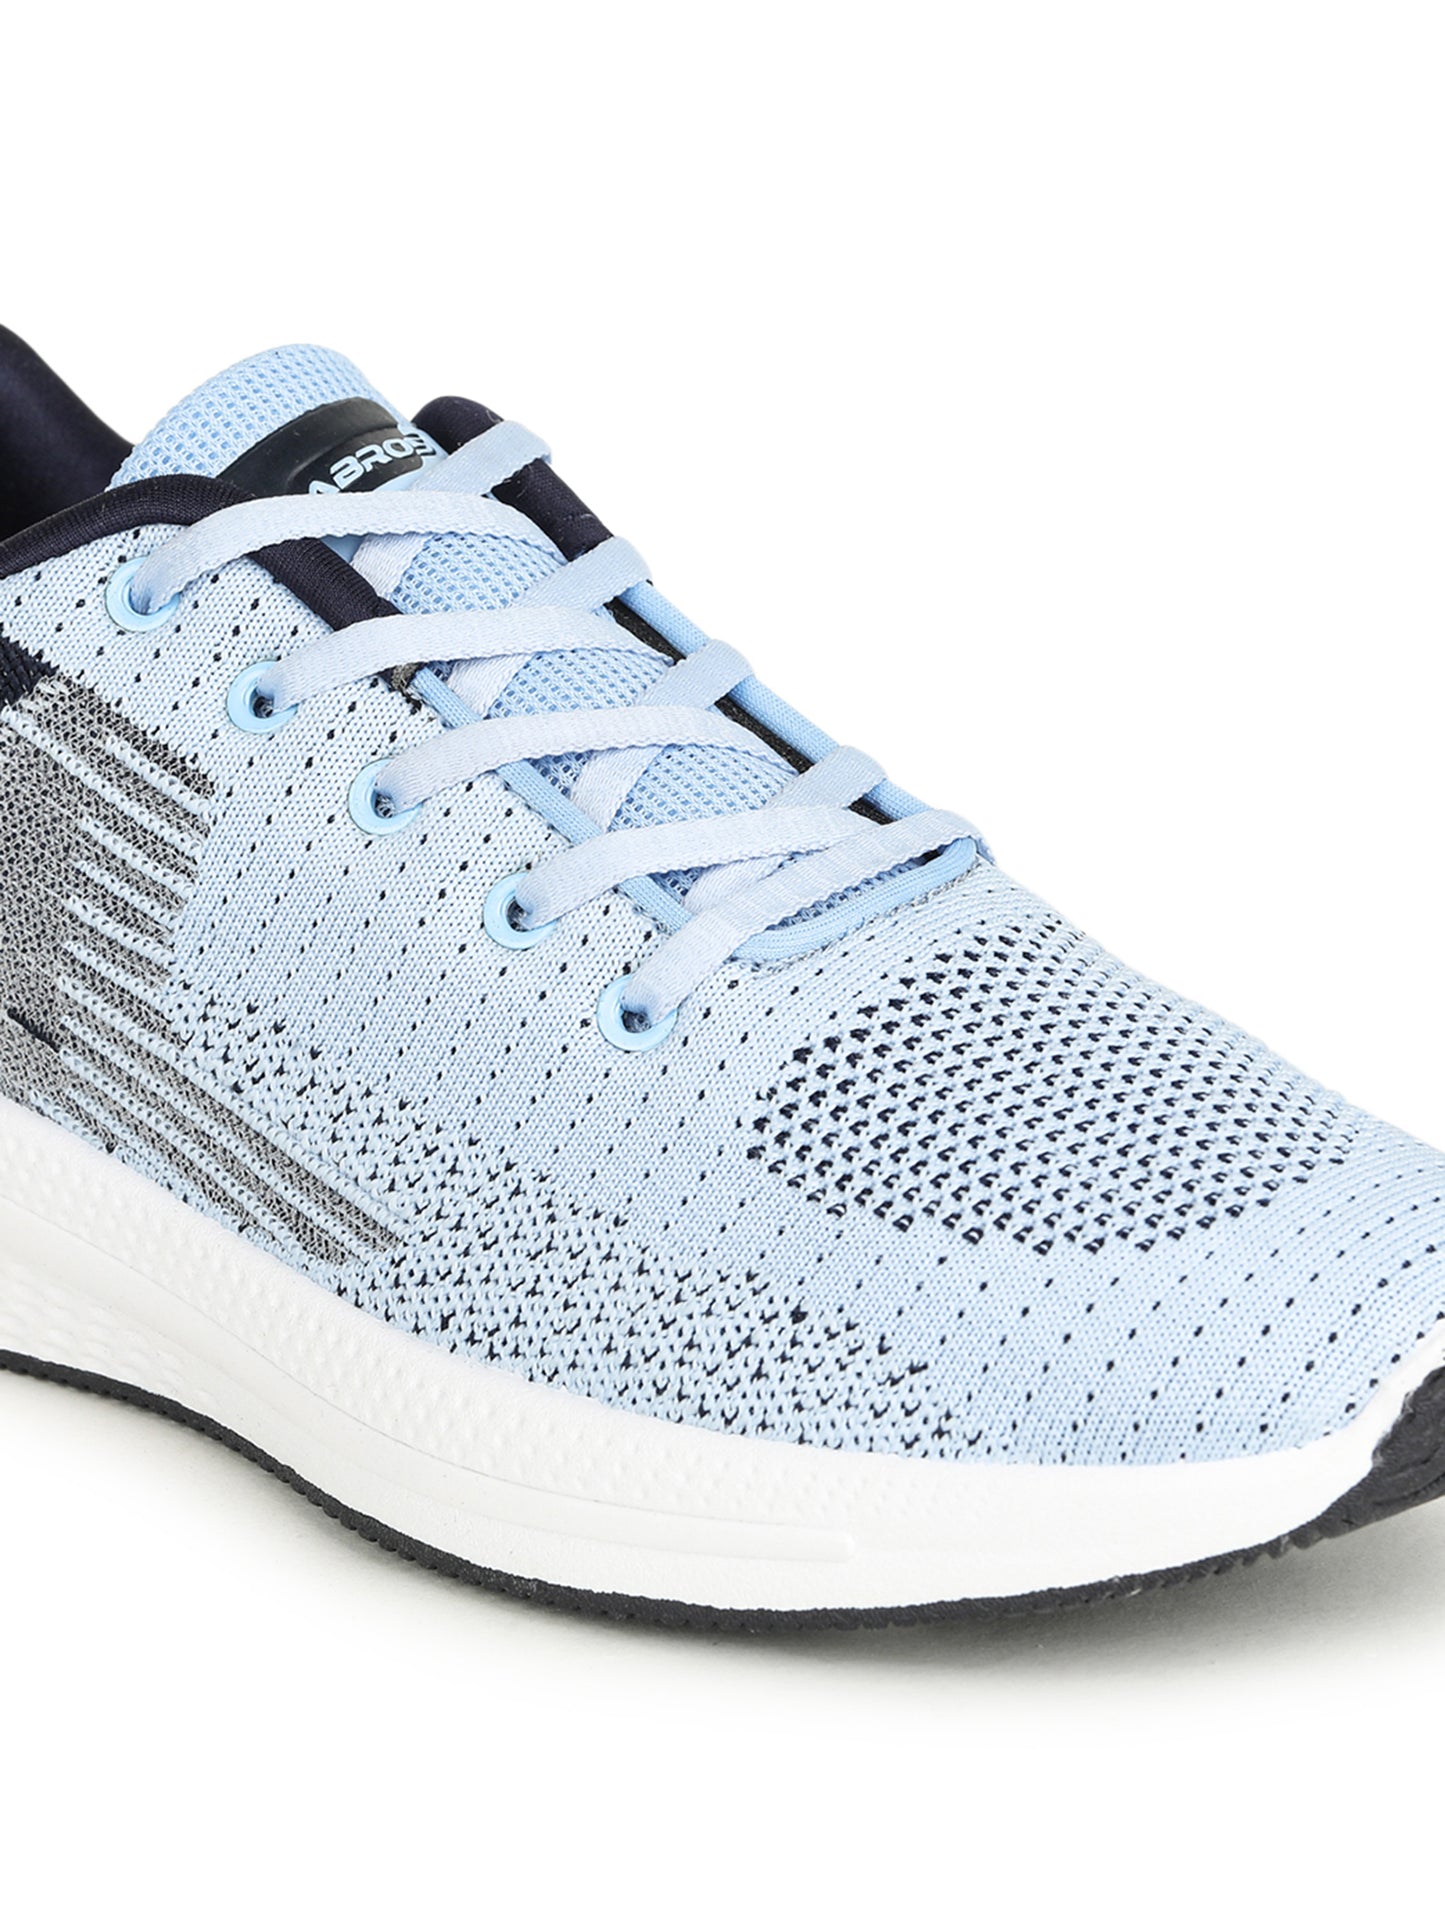 ABROS TREND SPORTS-SHOES FOR MEN